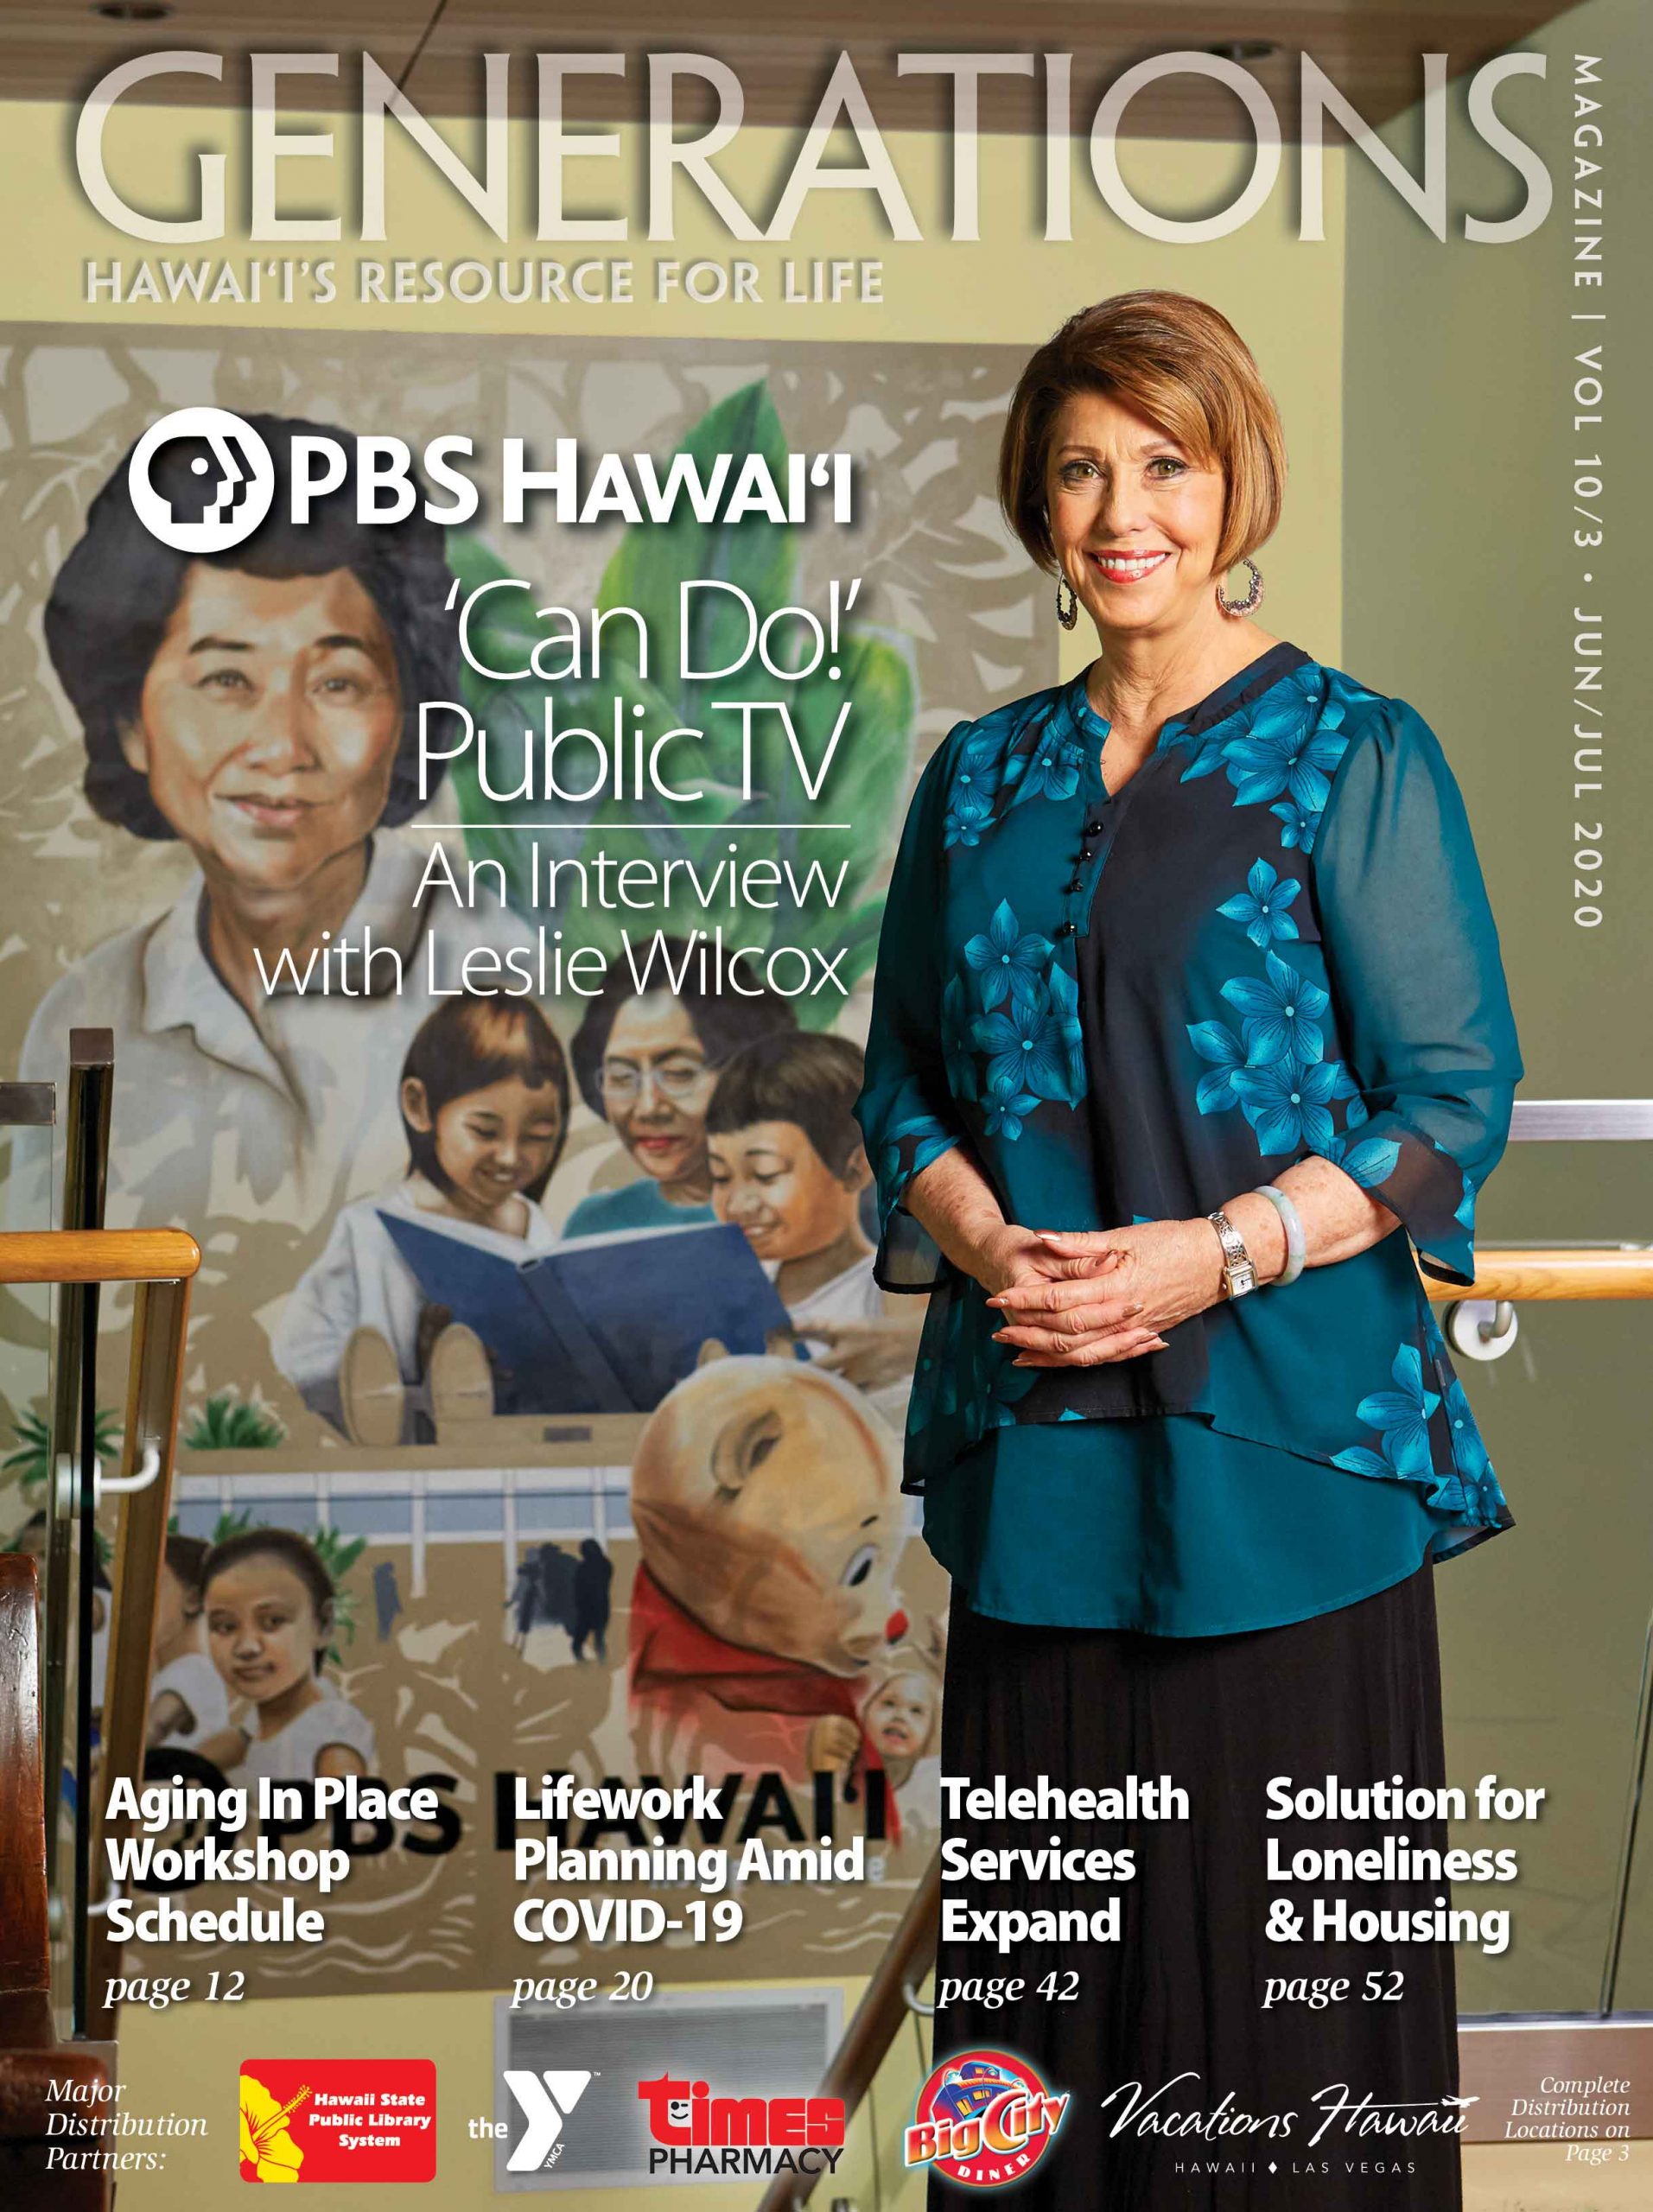 Cover for October-November 2017 Issue